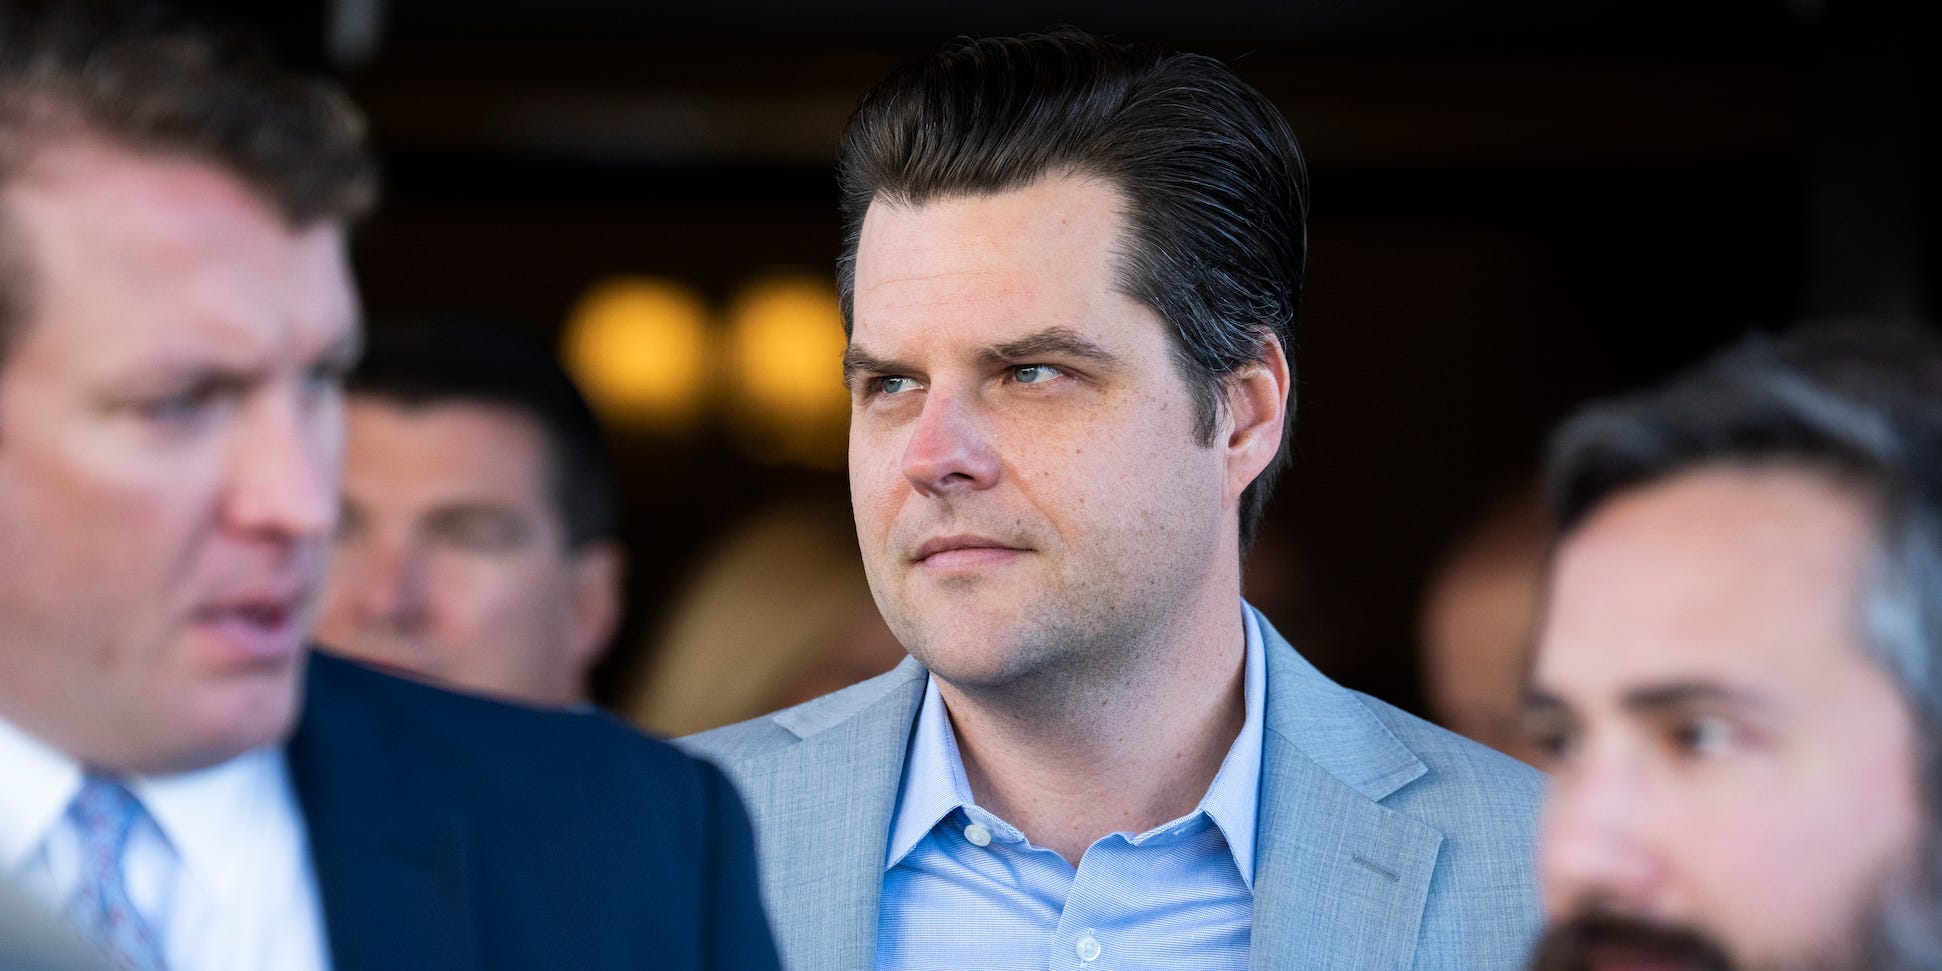 UNITED STATES - DECEMBER 1: Rep. Matt Gaetz, R-Fla., leaves a meeting of the House Republican Conference at the Capitol Hill Club on Wednesday, December 1, 2021. (Photo By Tom Williams/CQ-Roll Call, Inc via Getty Images)